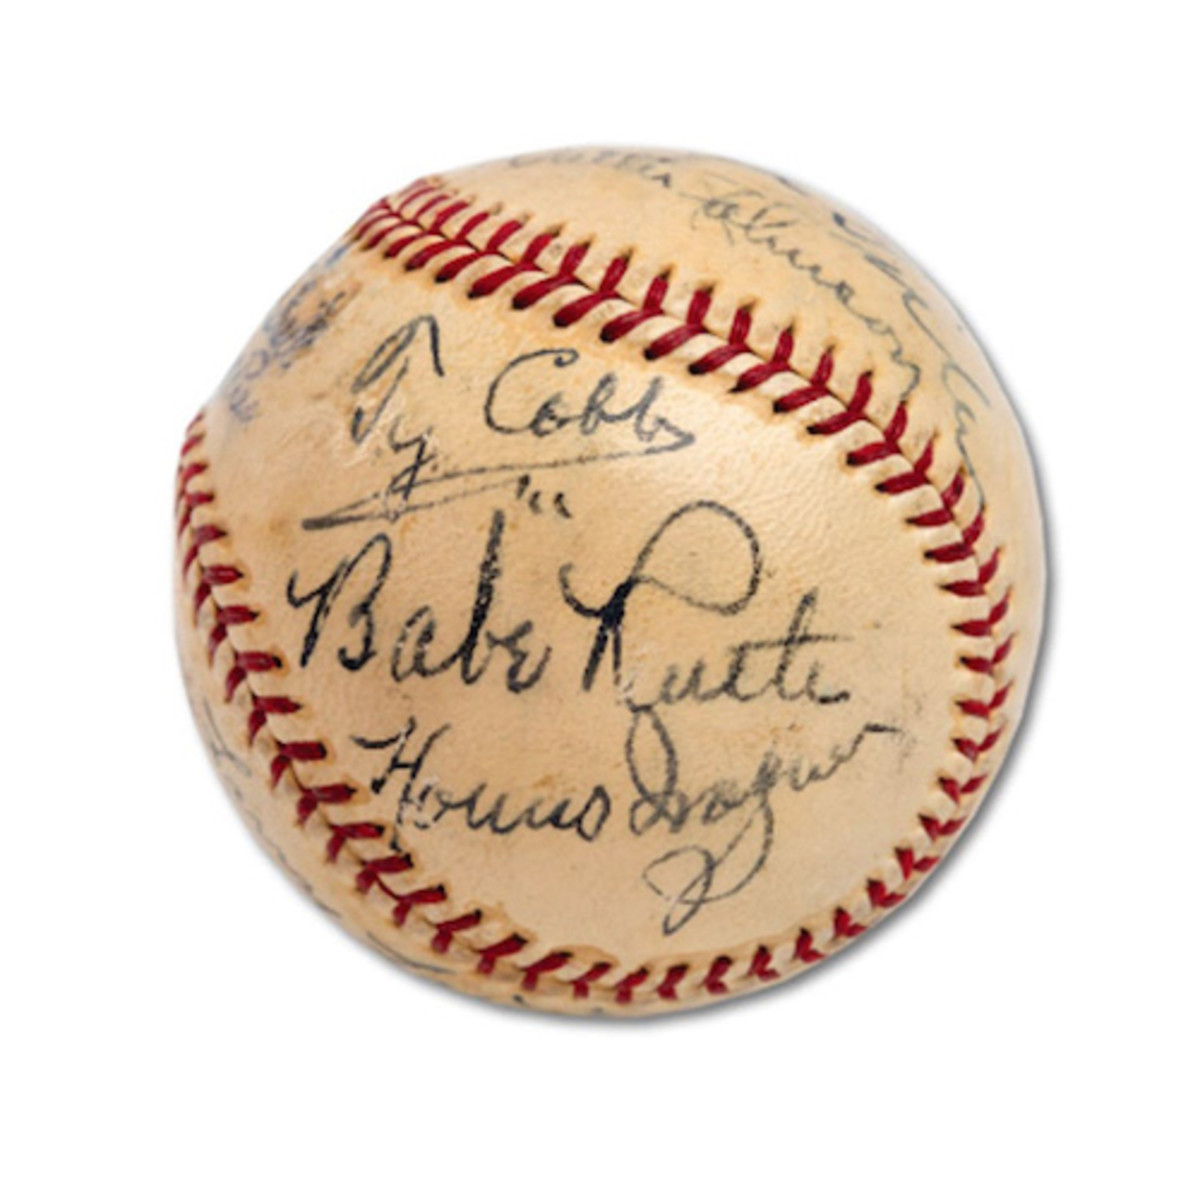 Most valuable autographed baseball